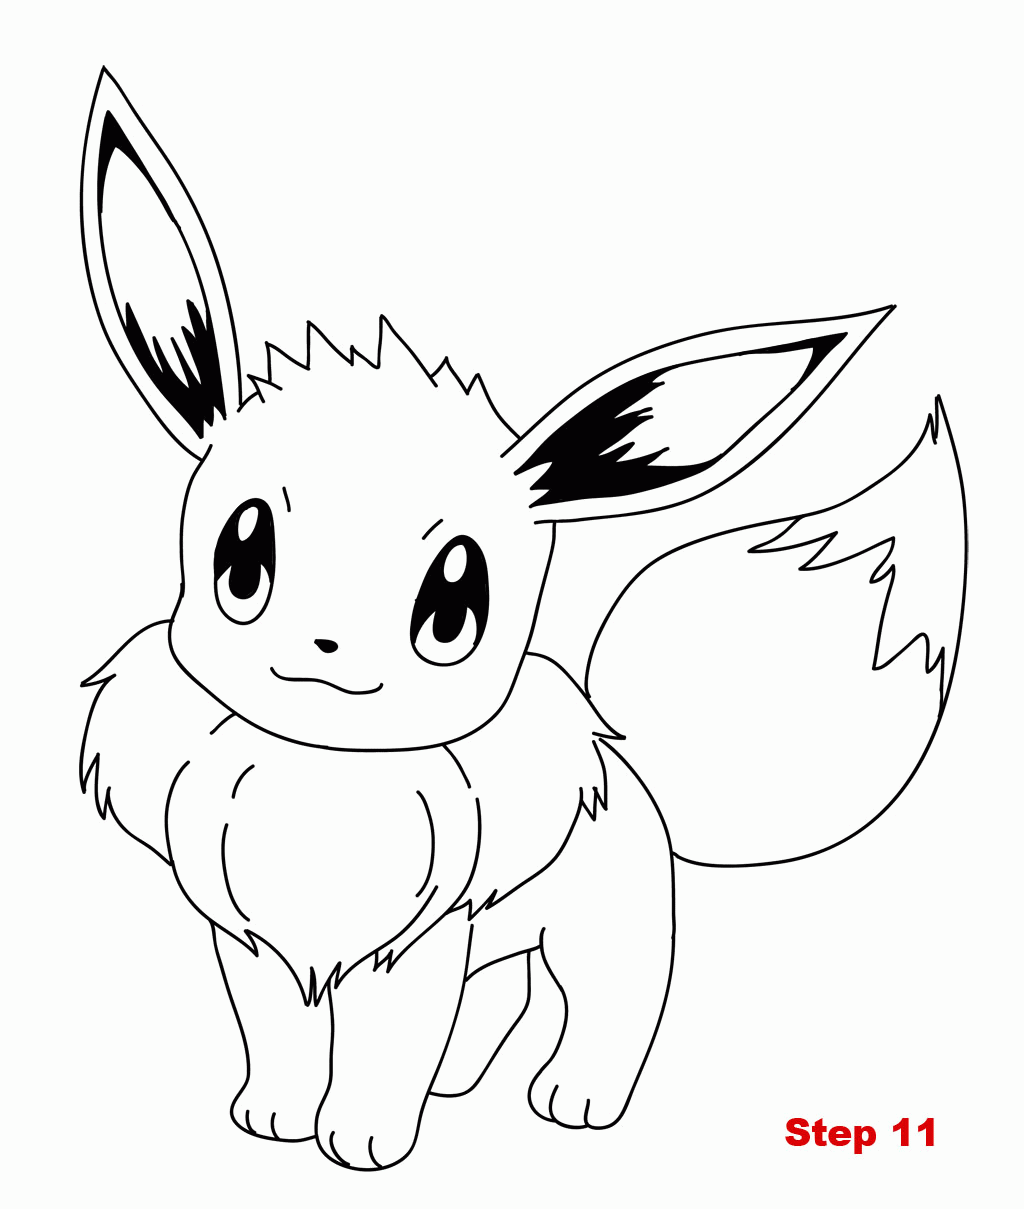 Eevee The Pokemon coloring Page